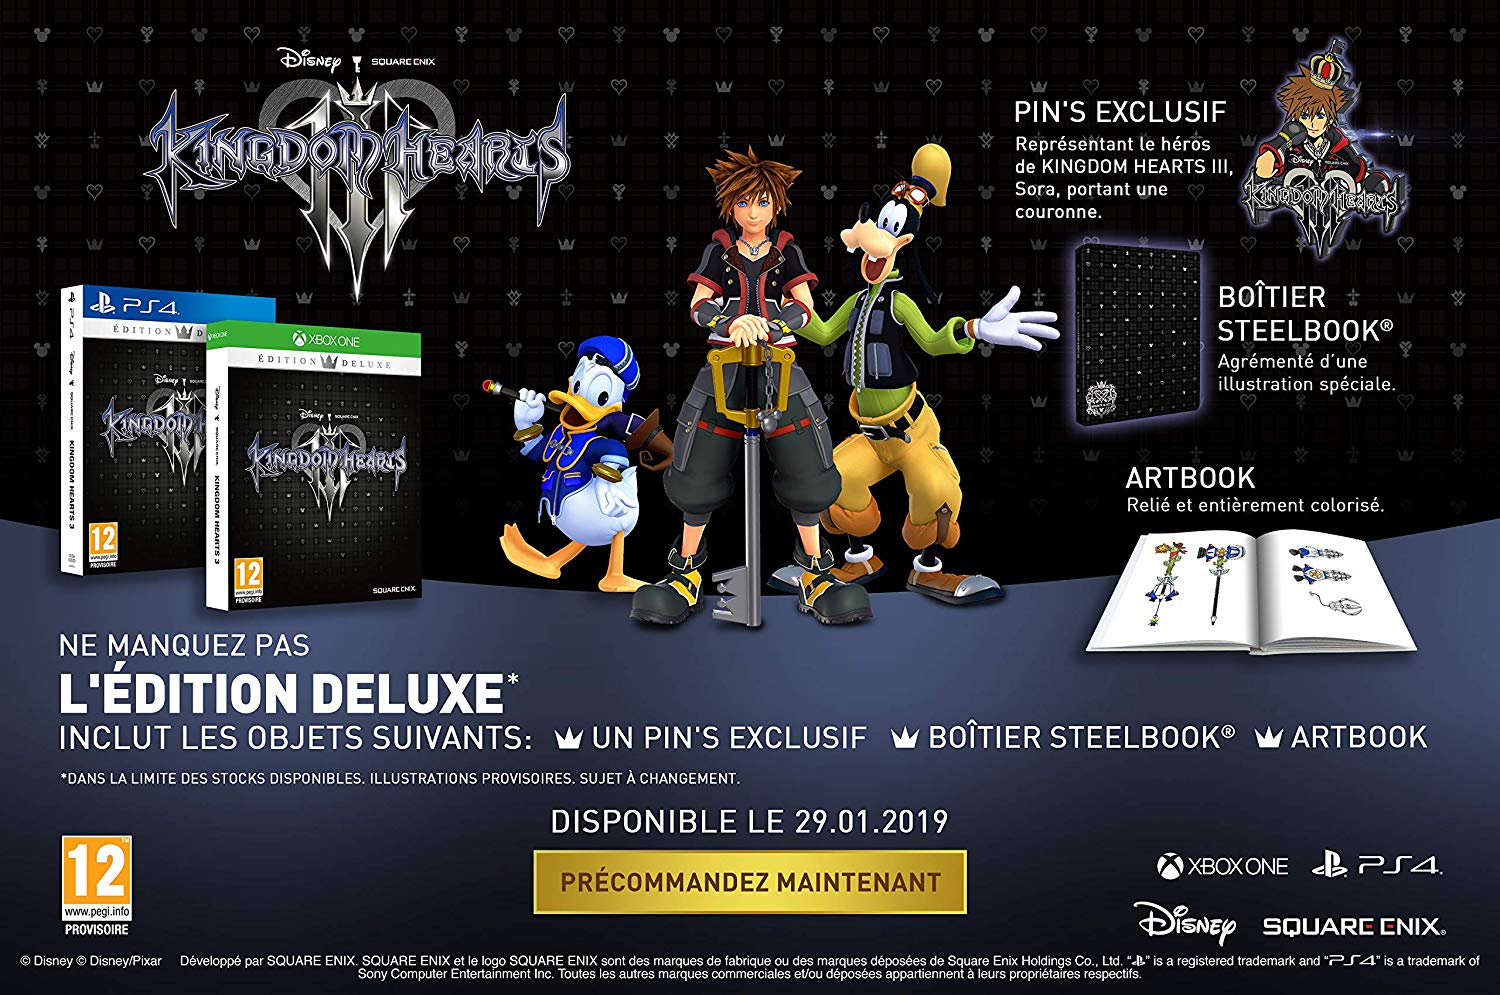 difference between standard and detox reflux deluxe kingdom hearts 3